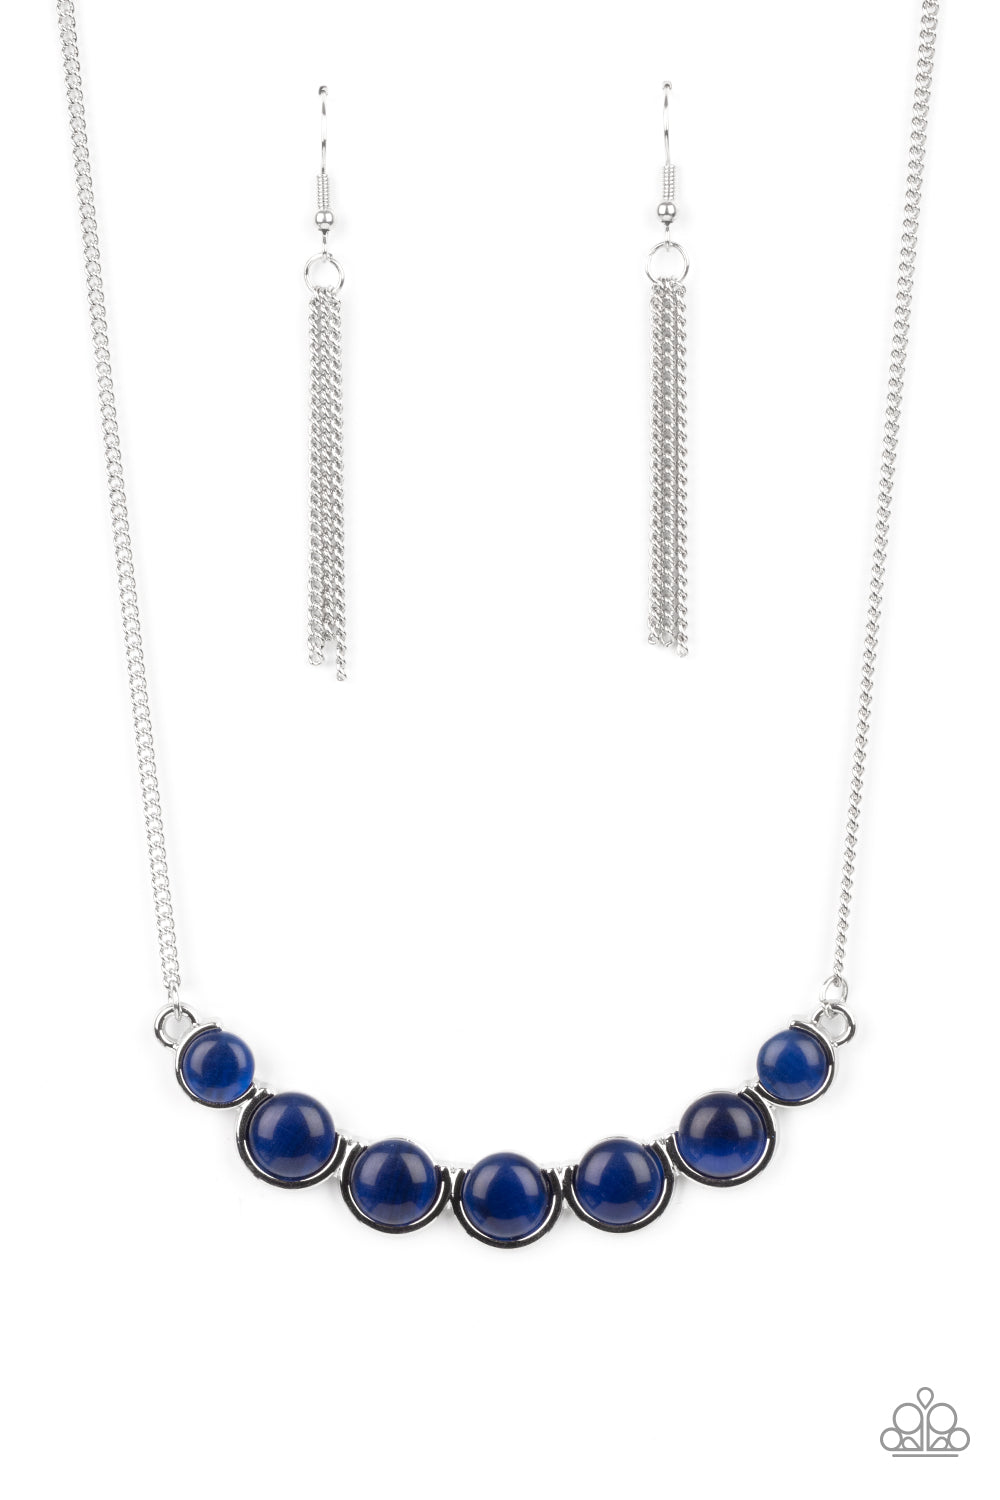 Serenely Scalloped Necklace - Blue